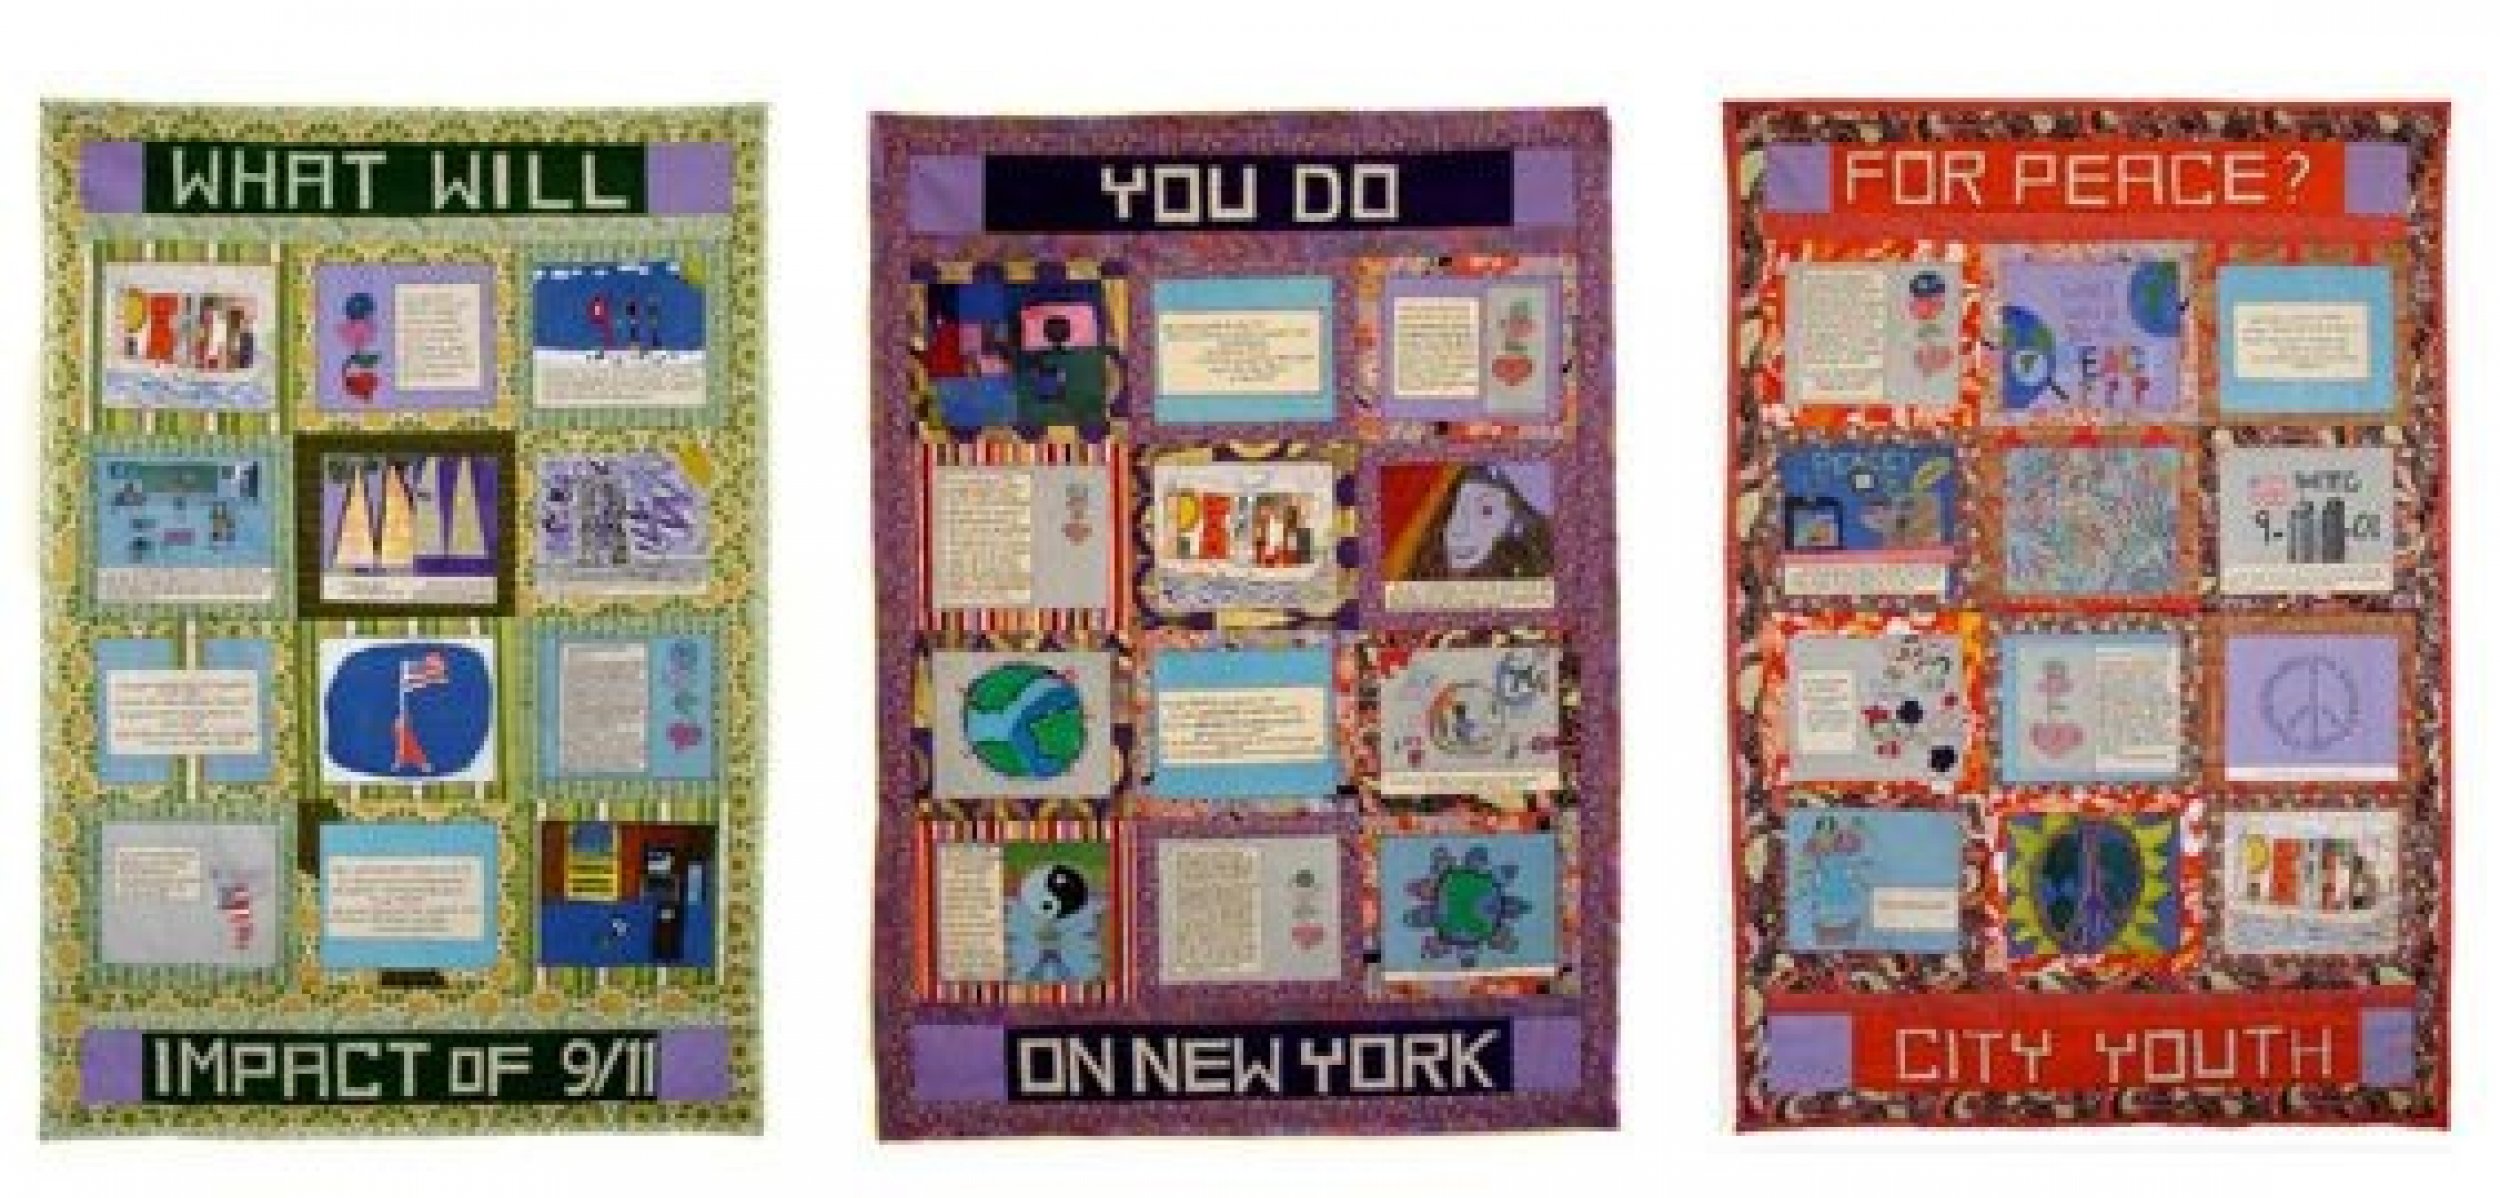 The 911 Peace Story Quilt 